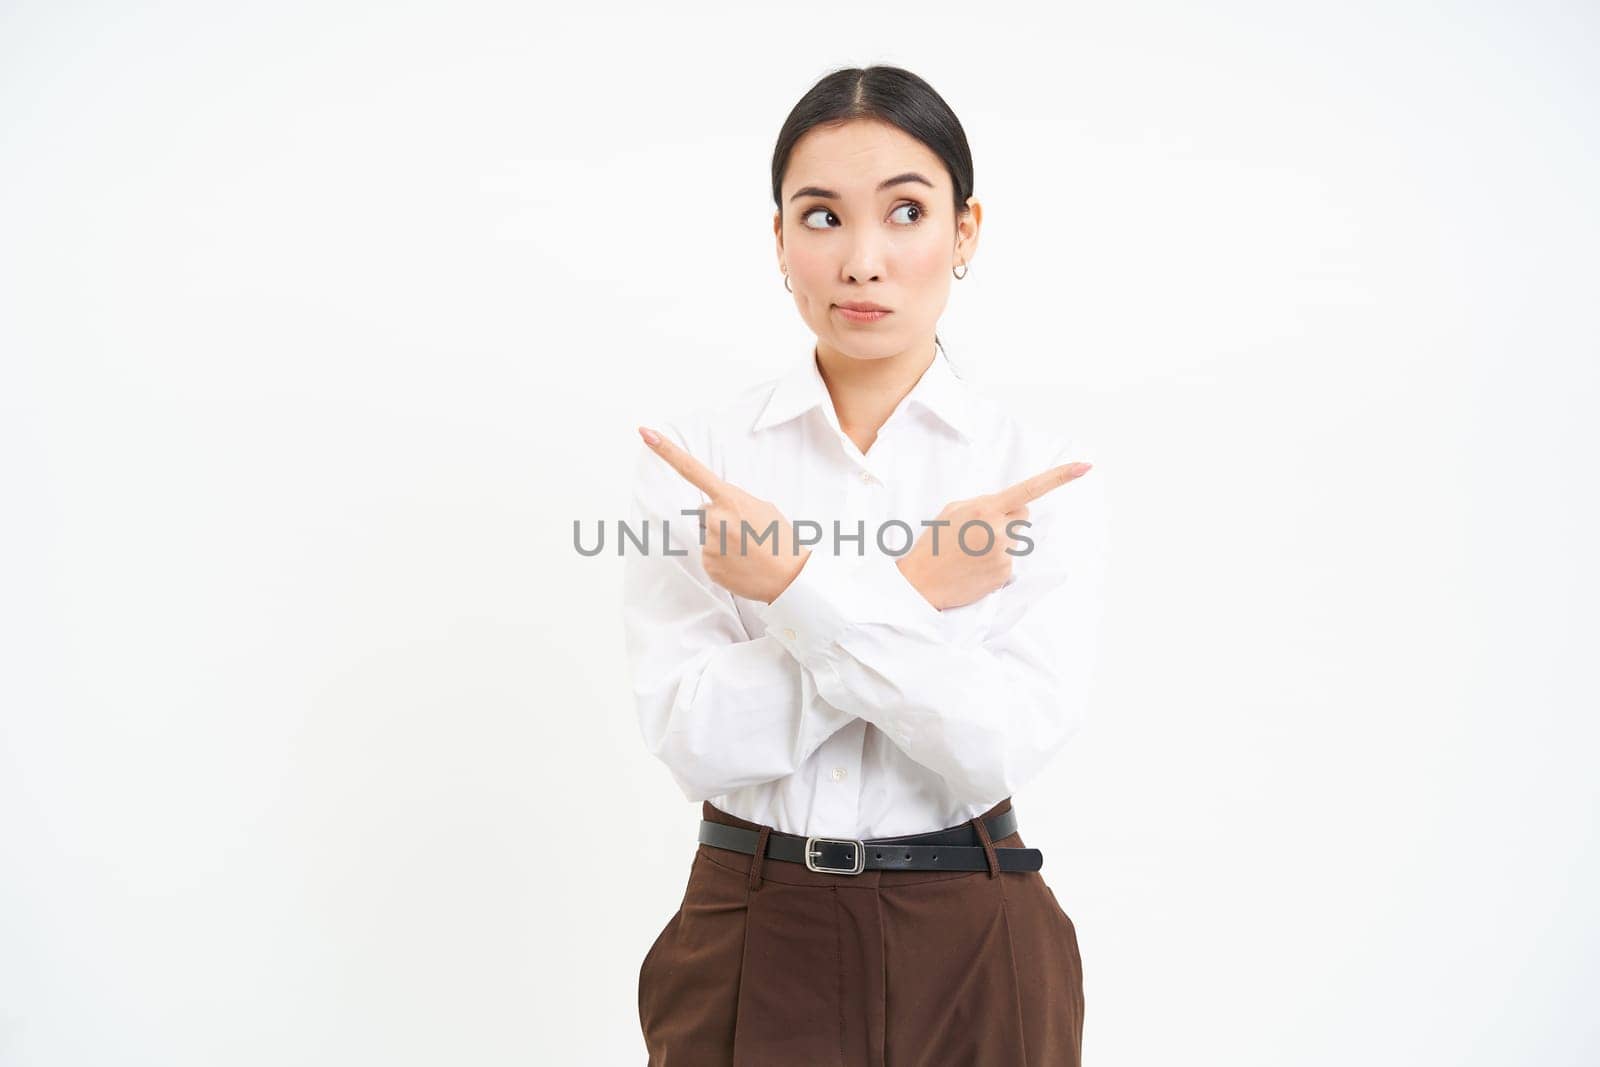 Puzzled businesswoman points sideways, shows two choices, makes decision, stands over white background.